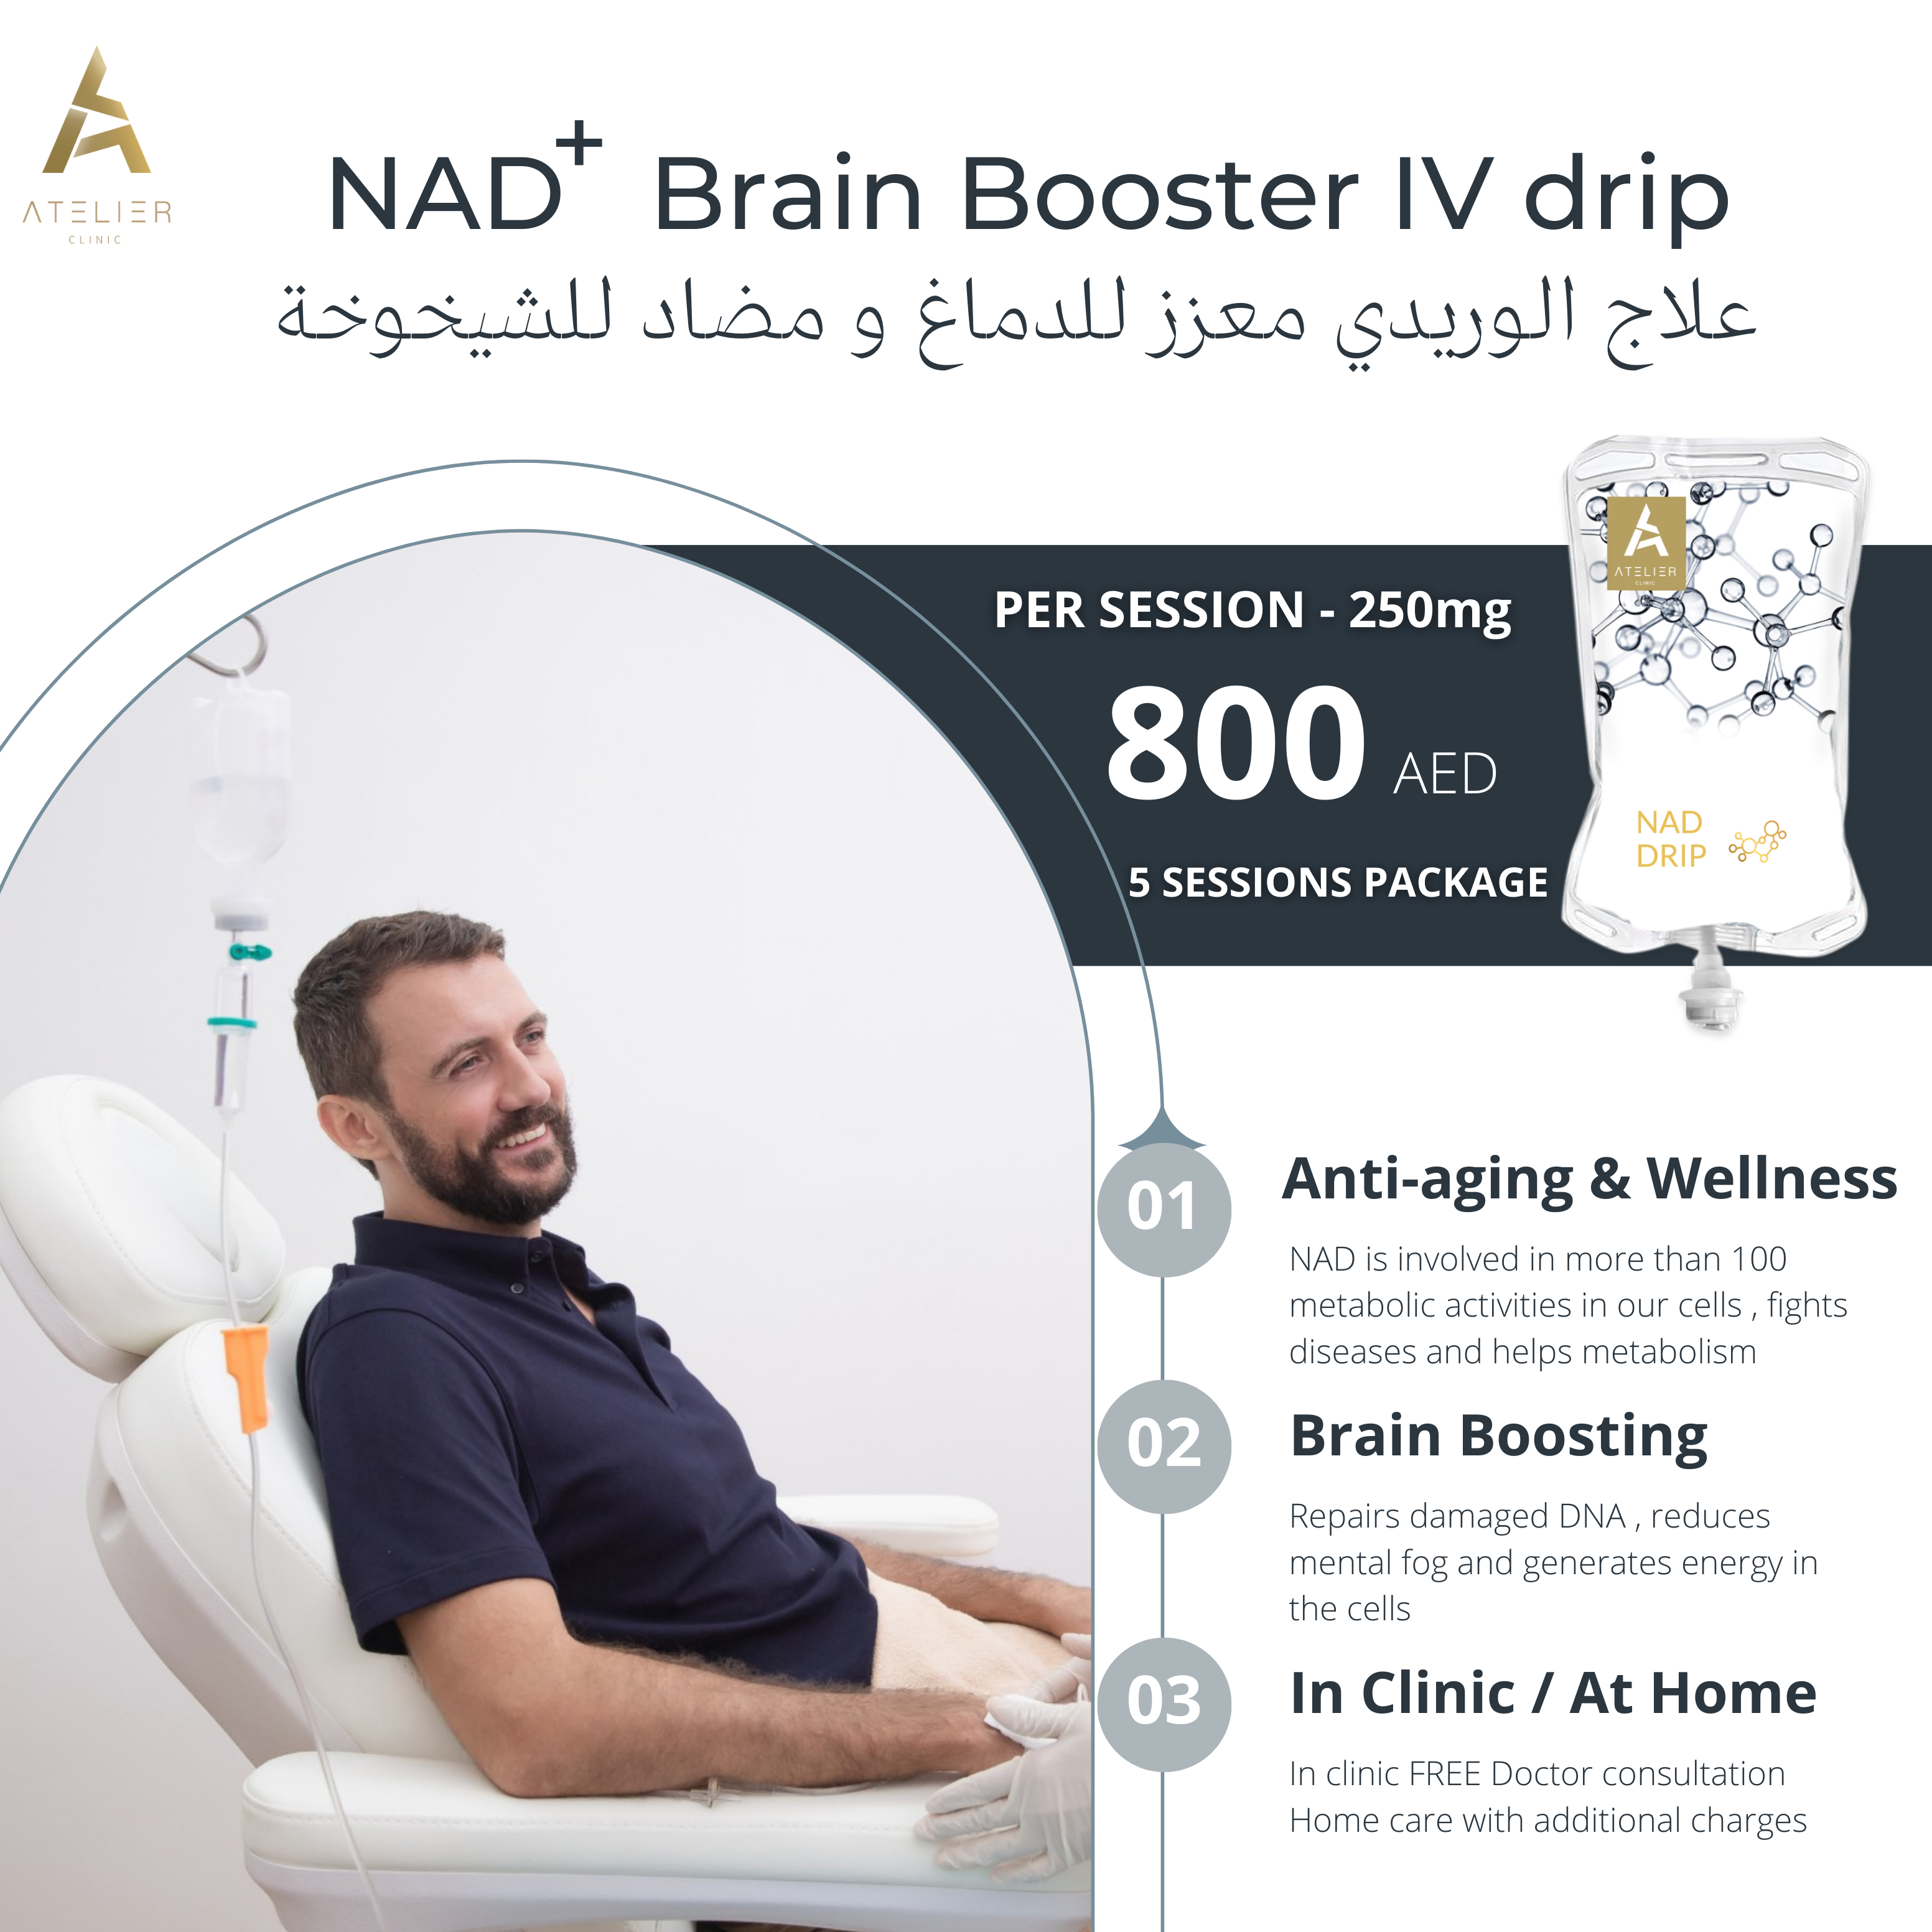 NAD+ Brain Booster IV Drip Package